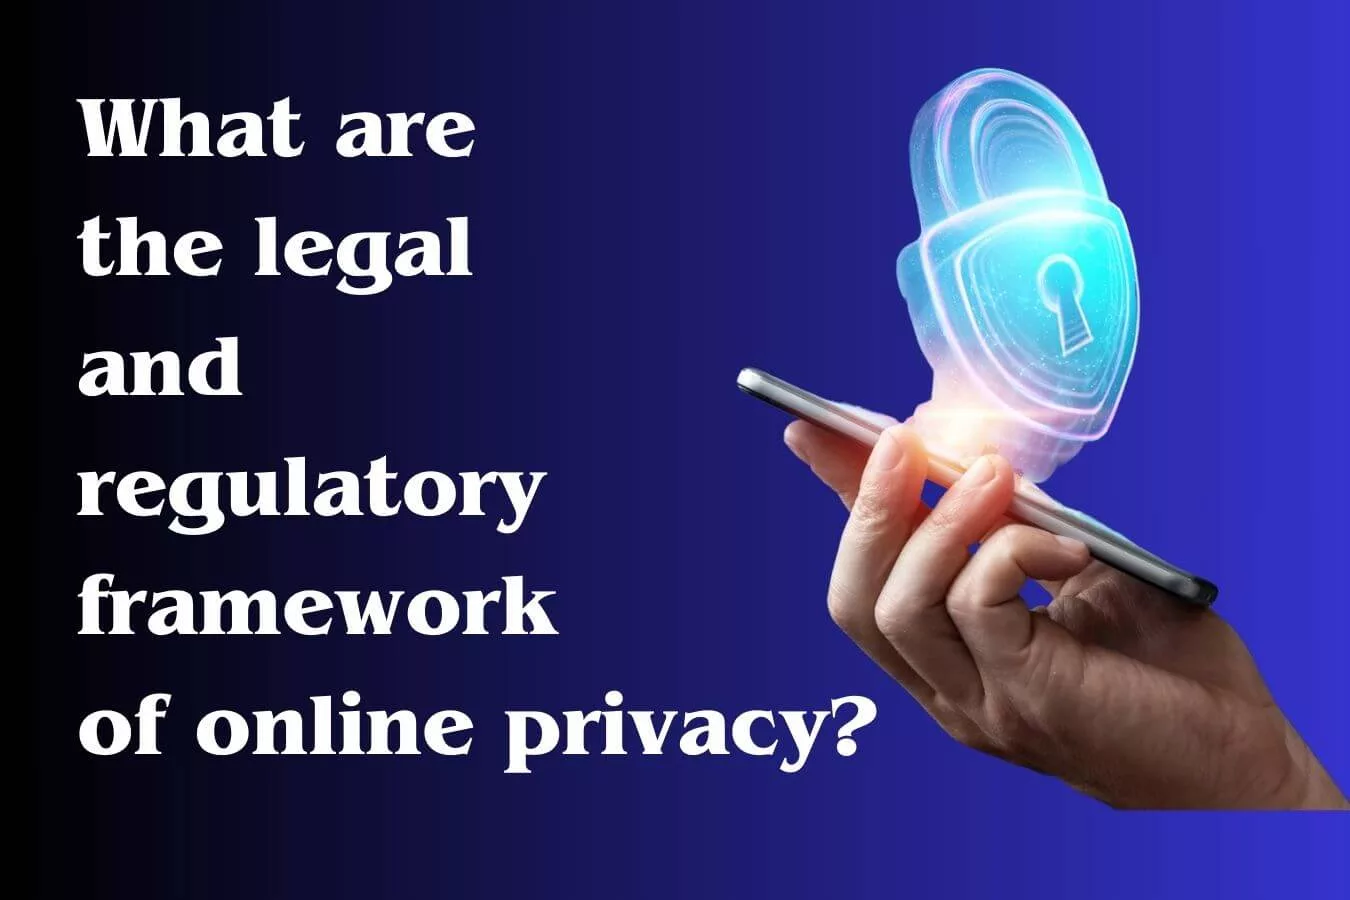 What are the legal and regulatory framework of online privacy?